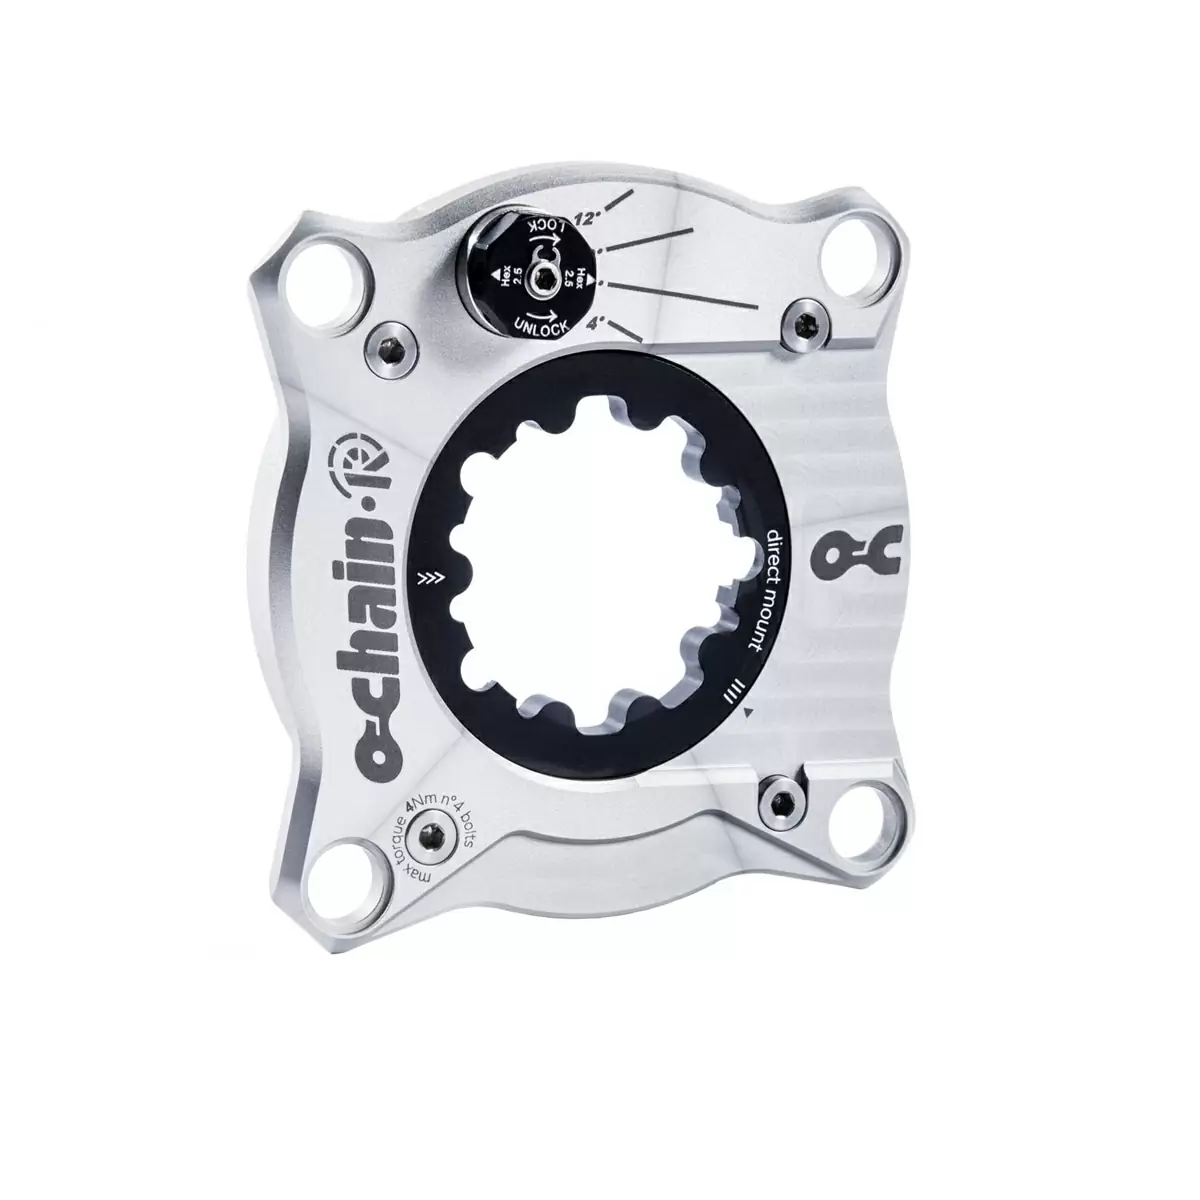 Active Spider R With Direct Mount Adjustment for Sram XX - X0 T-Type Pregio - image